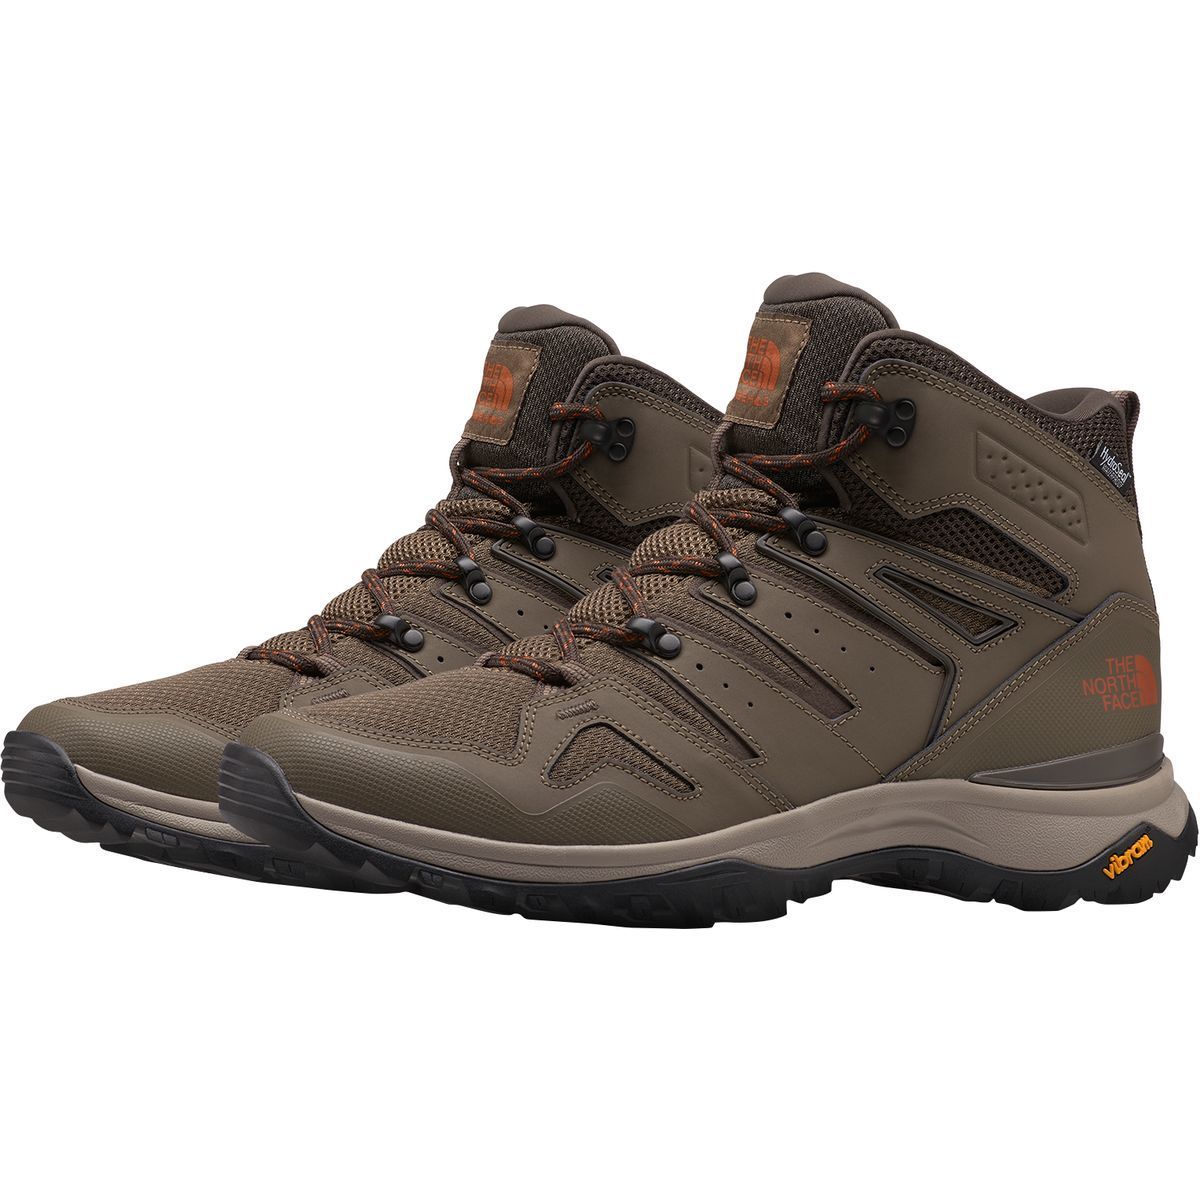 The North Face Hedgehog Fastpack II Mid 